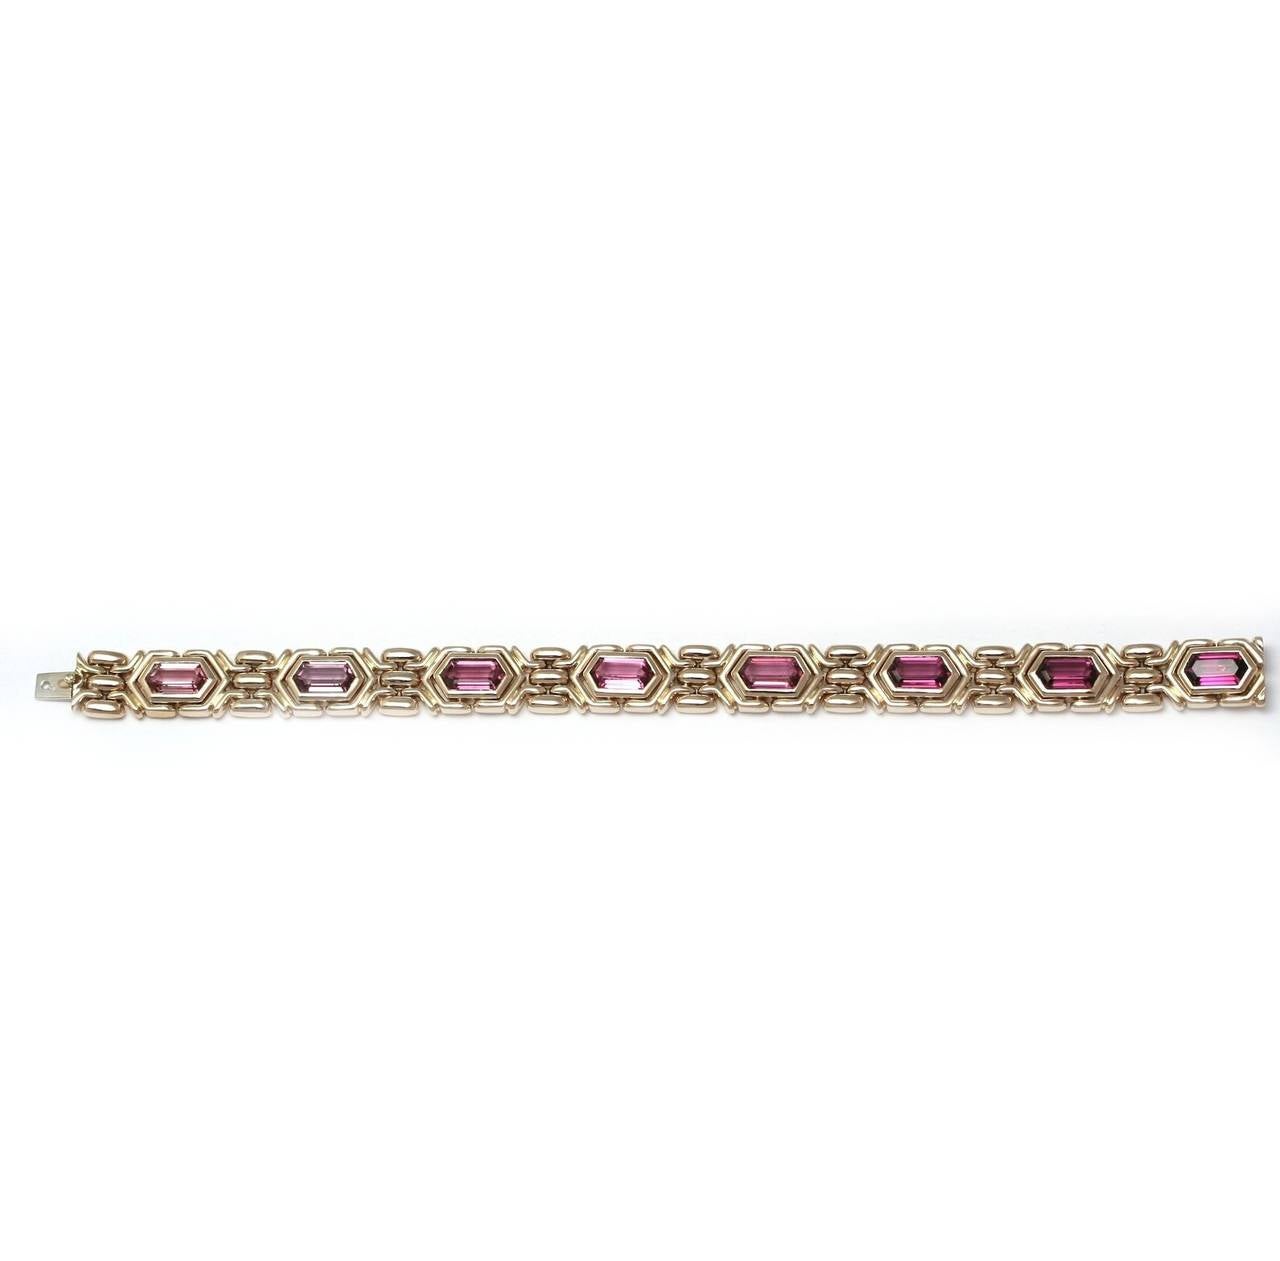 BVLGARI Bracelet in yellow gold set with pink tourmaline, signed, 185mm (62.7 grams)